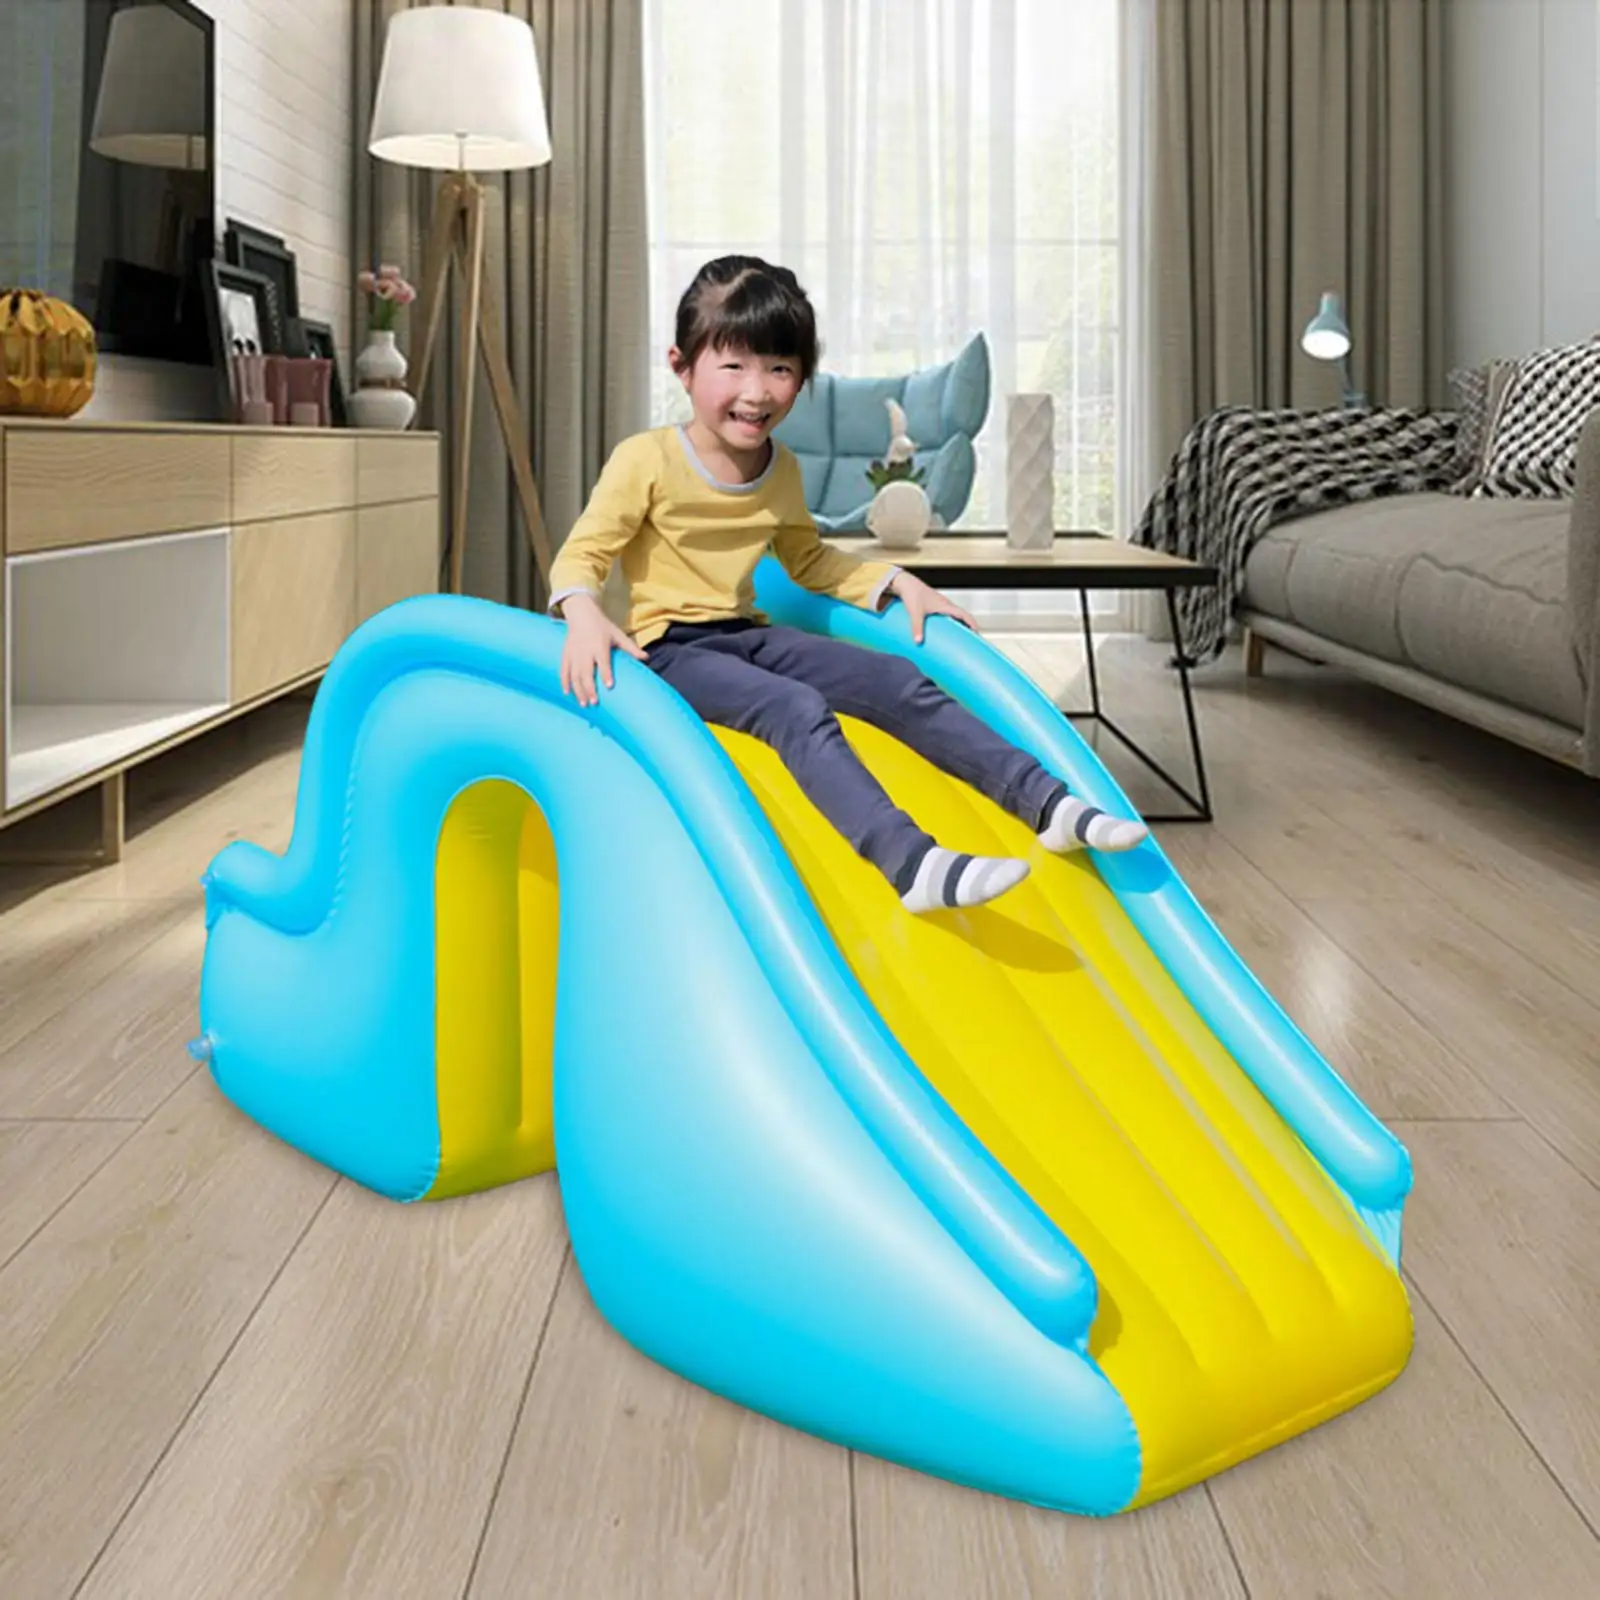 Inflatable Slide Durable PVC Waterslide for Toys Backyard Outdoor